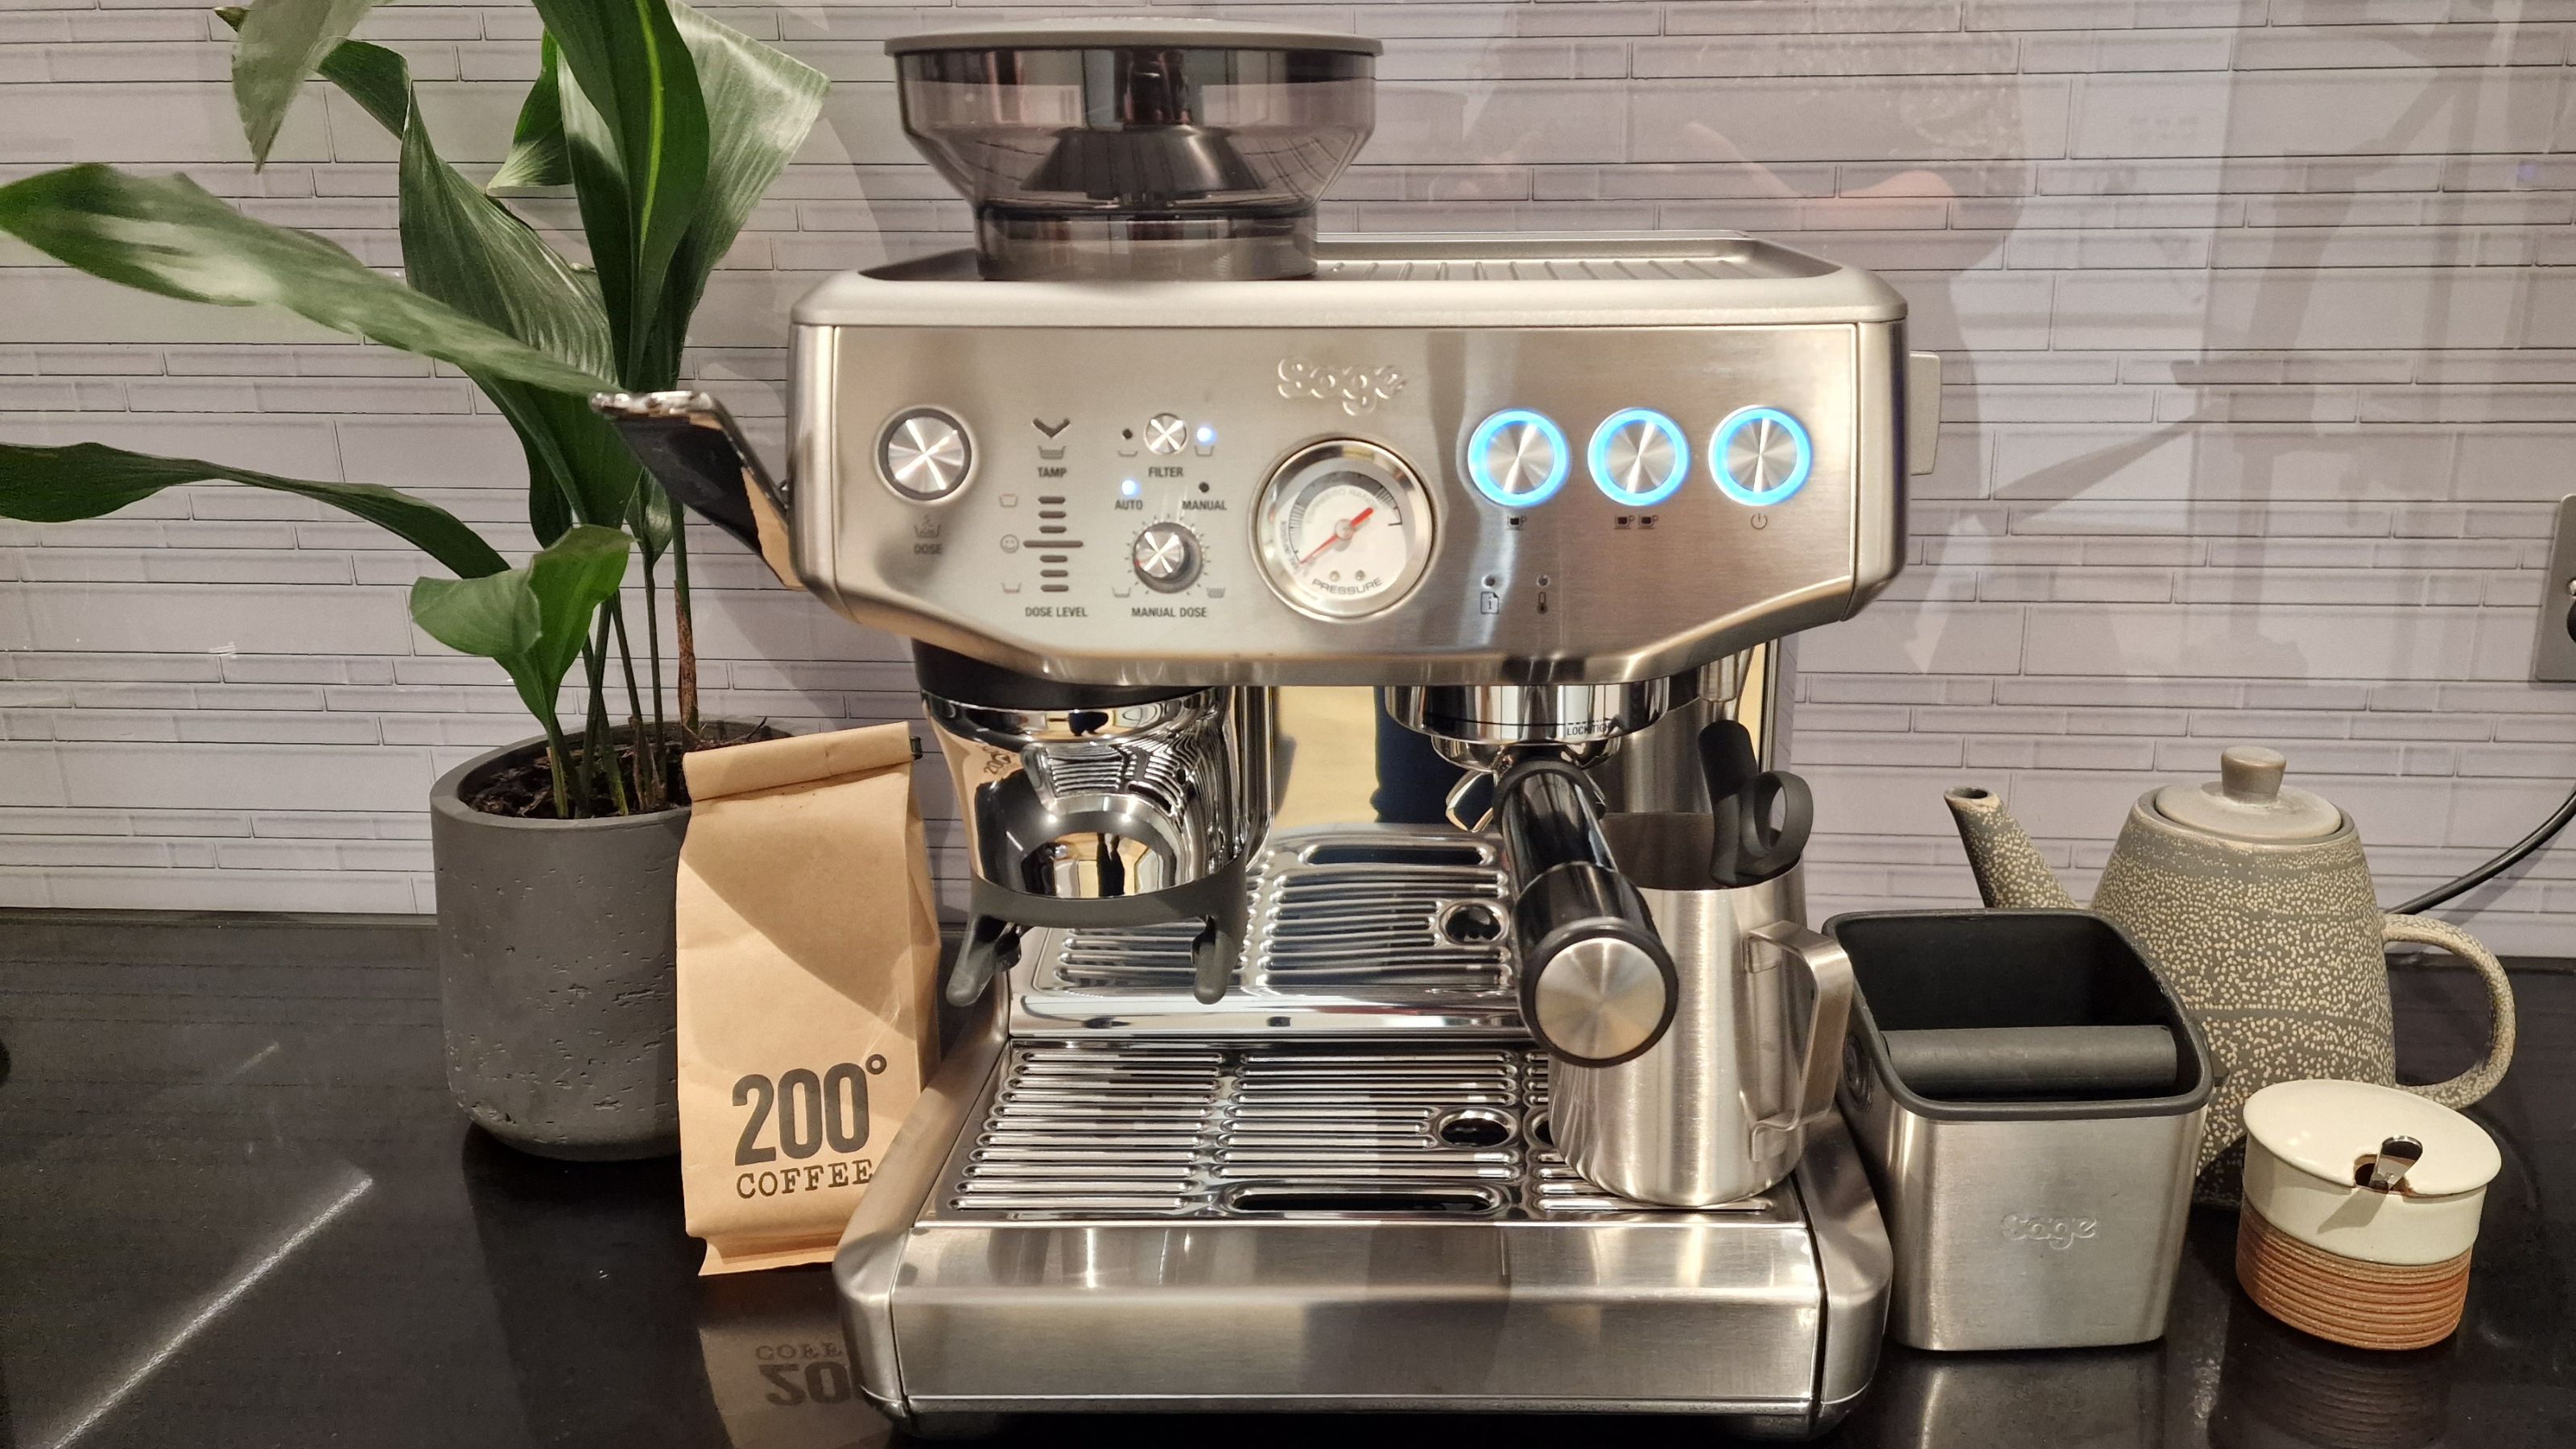 Sage's Barista Express Impress is the holy grail of homemade